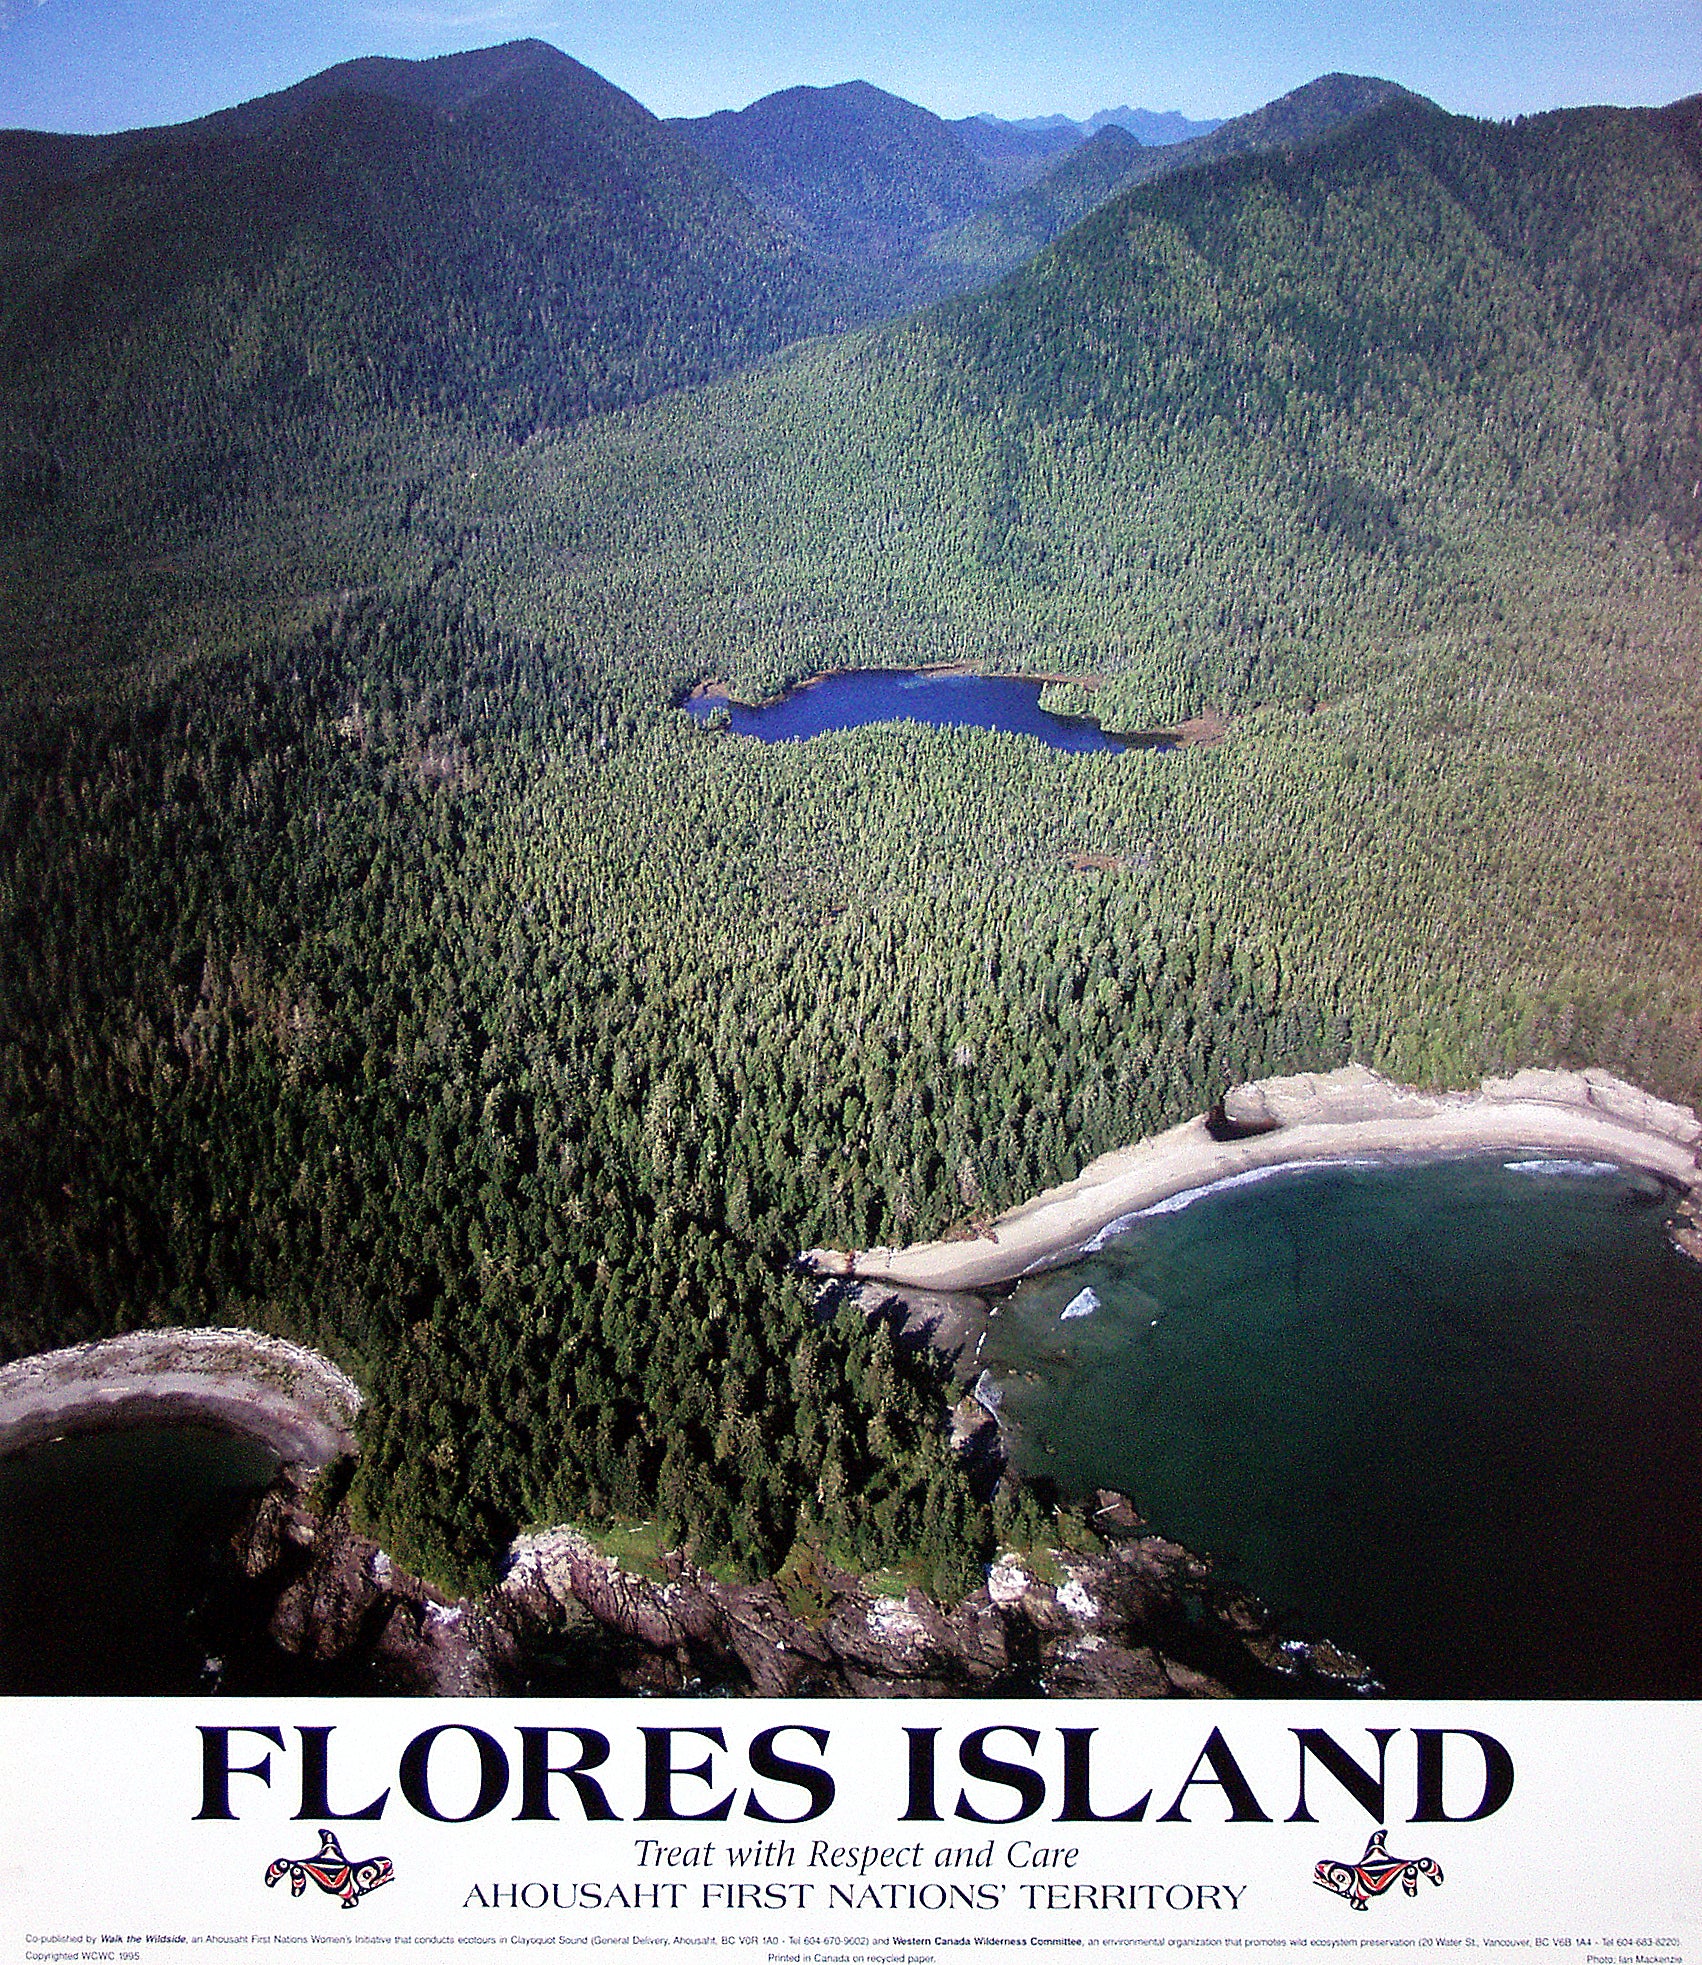 An aerial shot of Flores island - the island is covered in forested mountain. Text over the image says "Flores Island - Treat with Respect and Care. Ahousaht First Nations' Territory." End of image description.